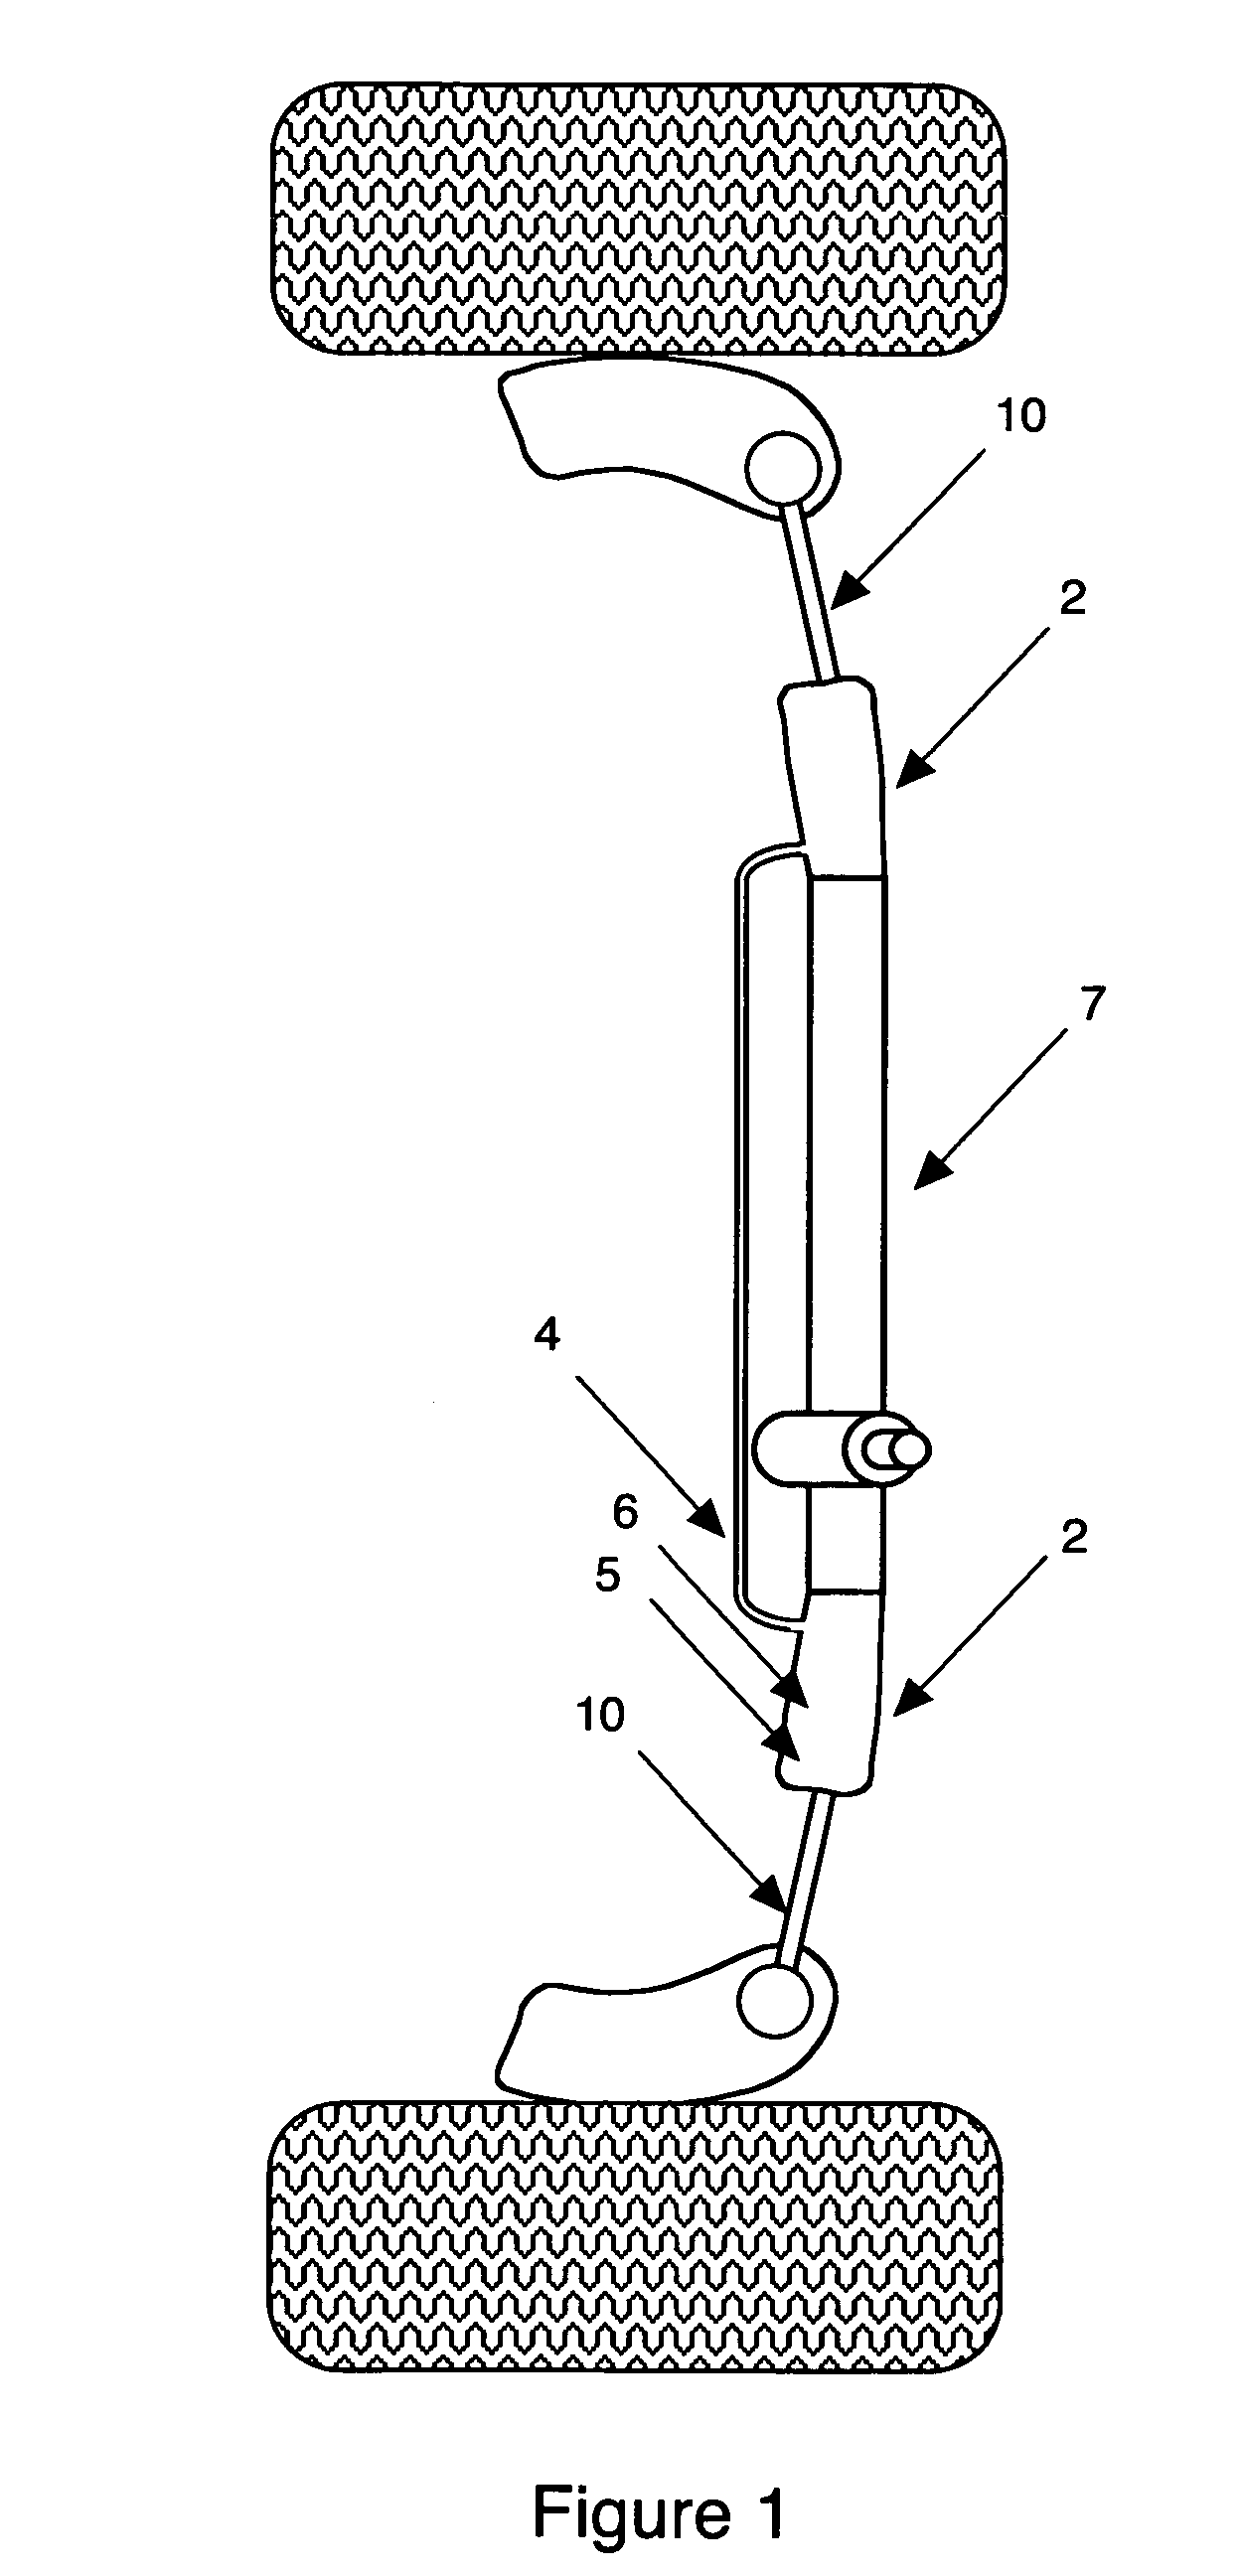 Hydraulic damper integrated into steering rack for attenuating steering nibble